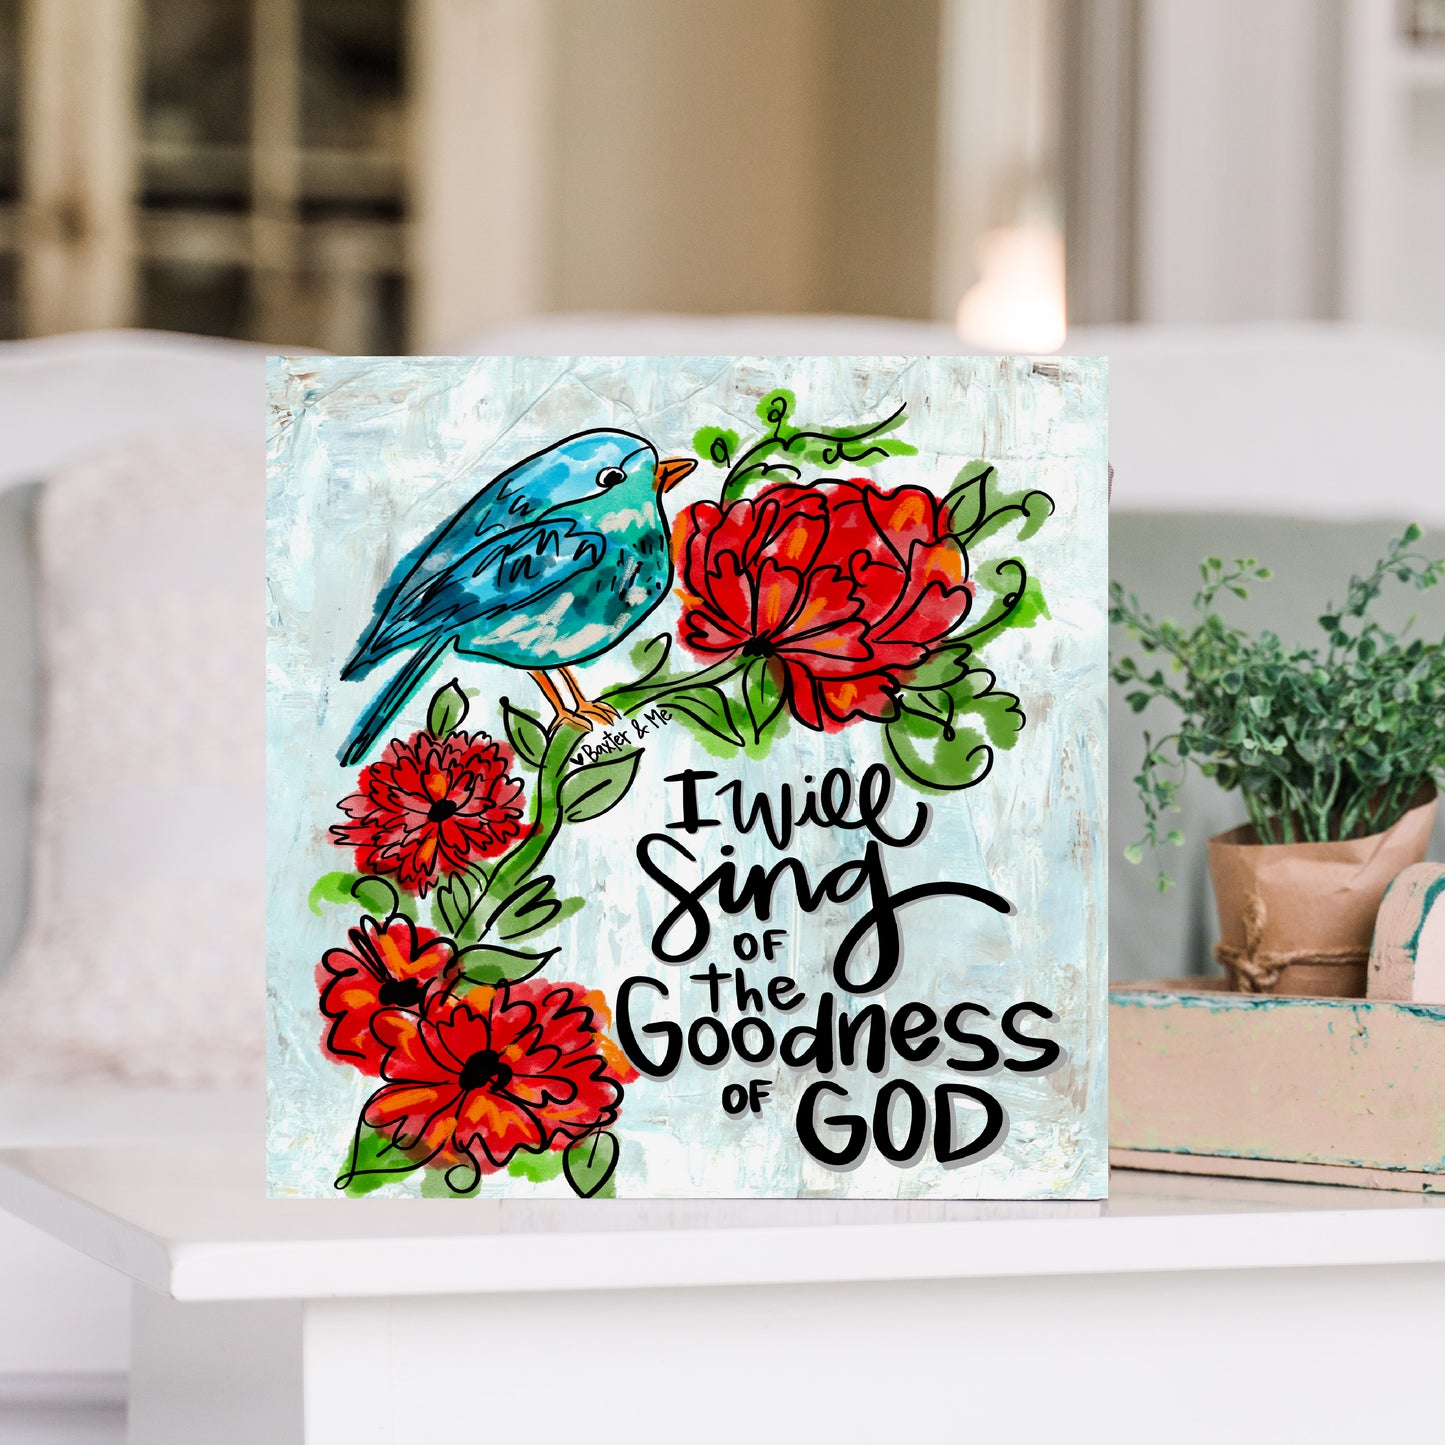 Goodness of God Wrapped Canvas